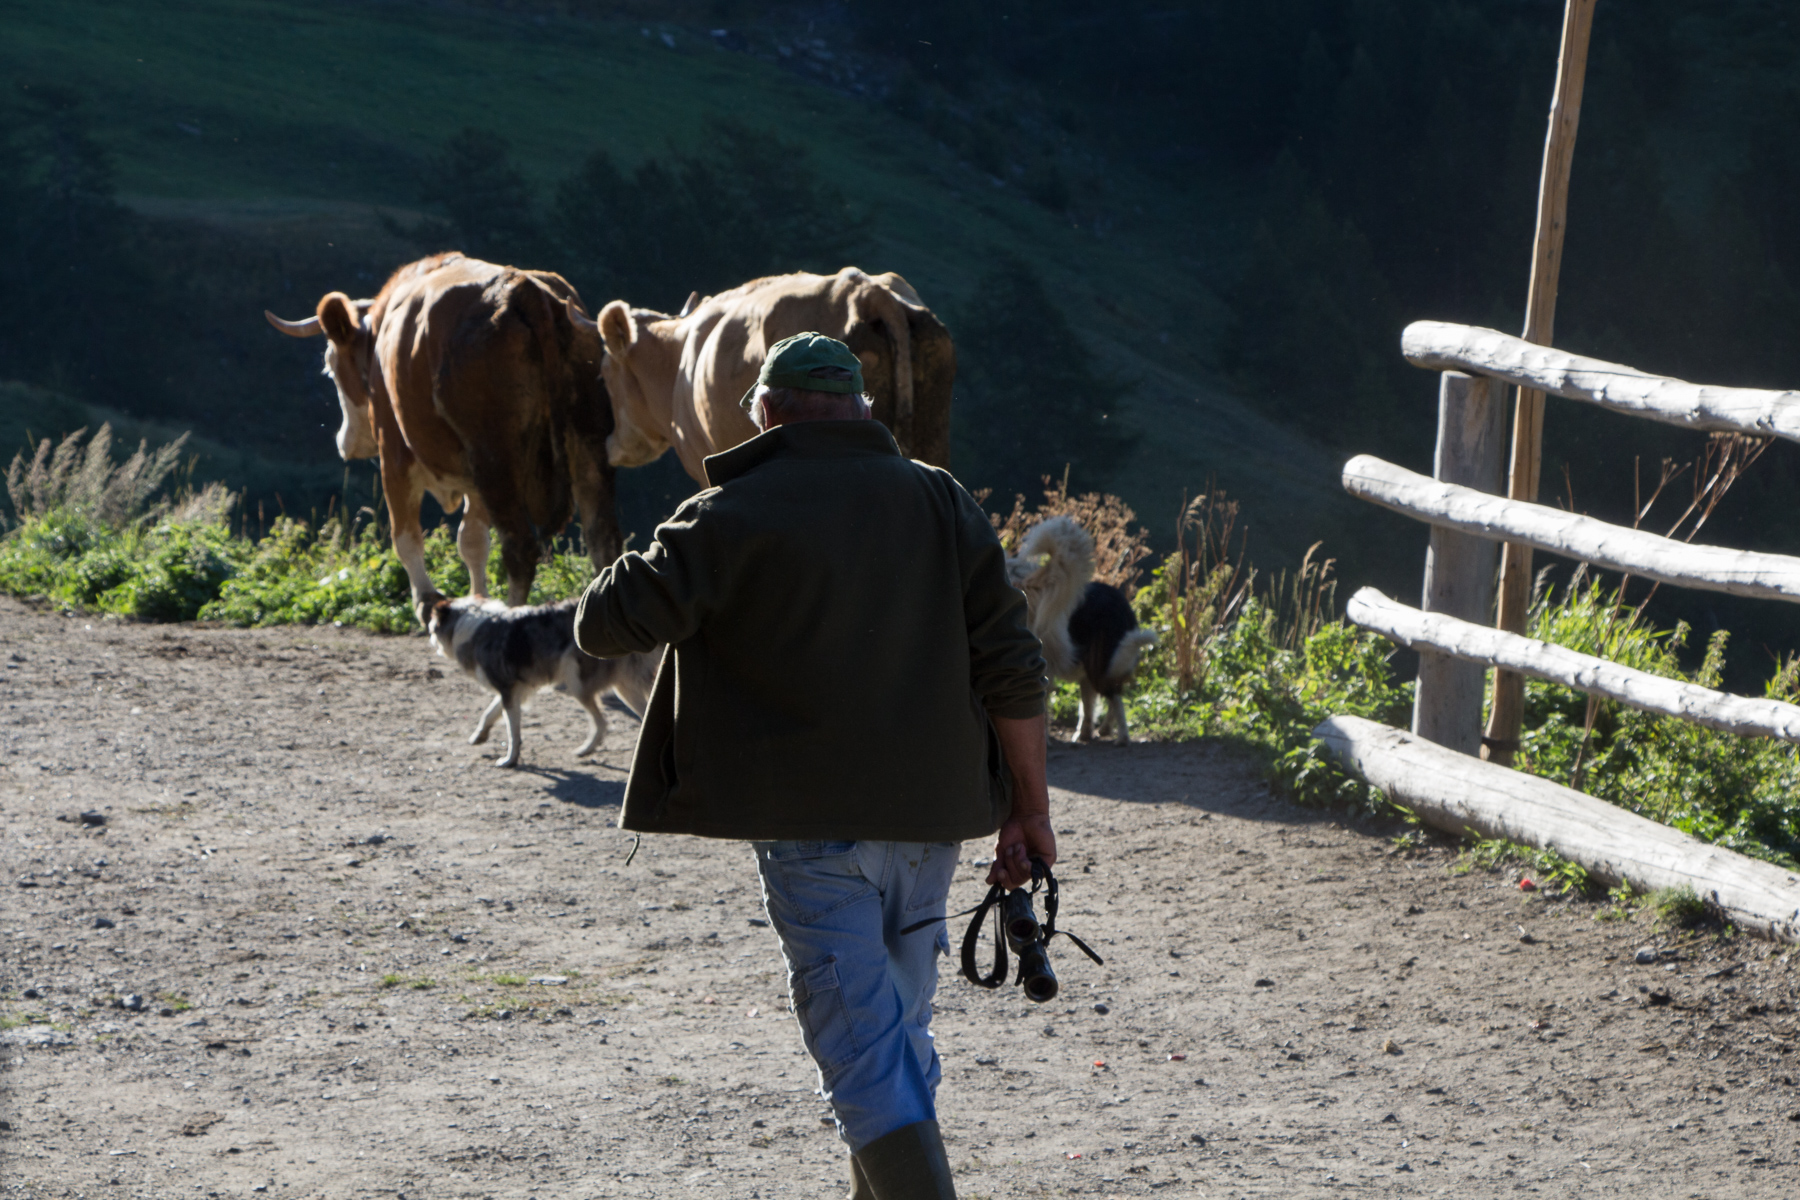 Going out with the cattle, Valle Argentera, 2018